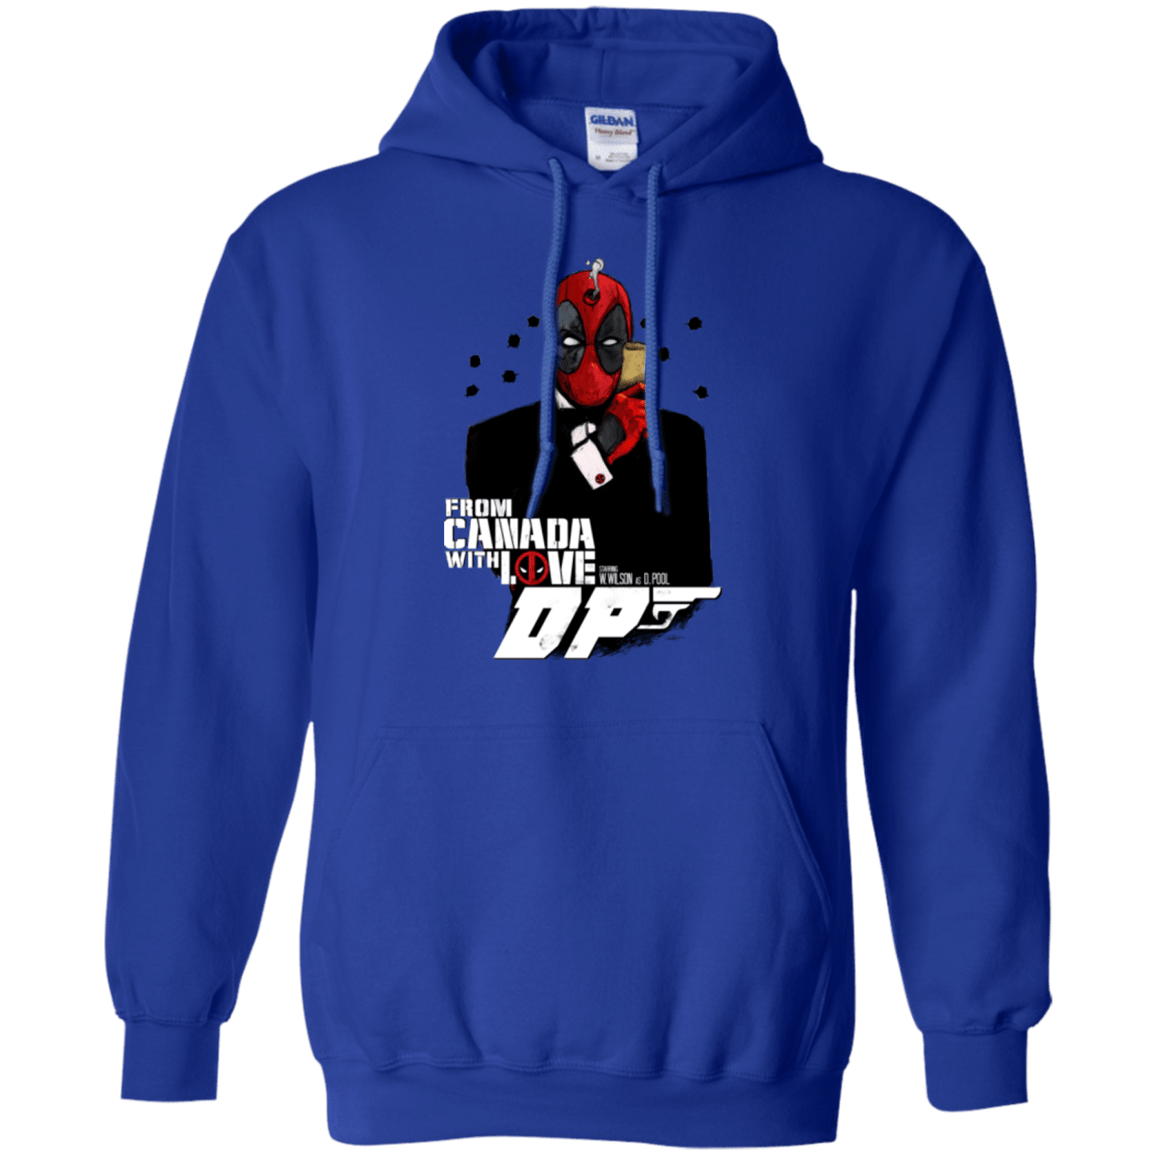 From Canada with Love Pullover Hoodie